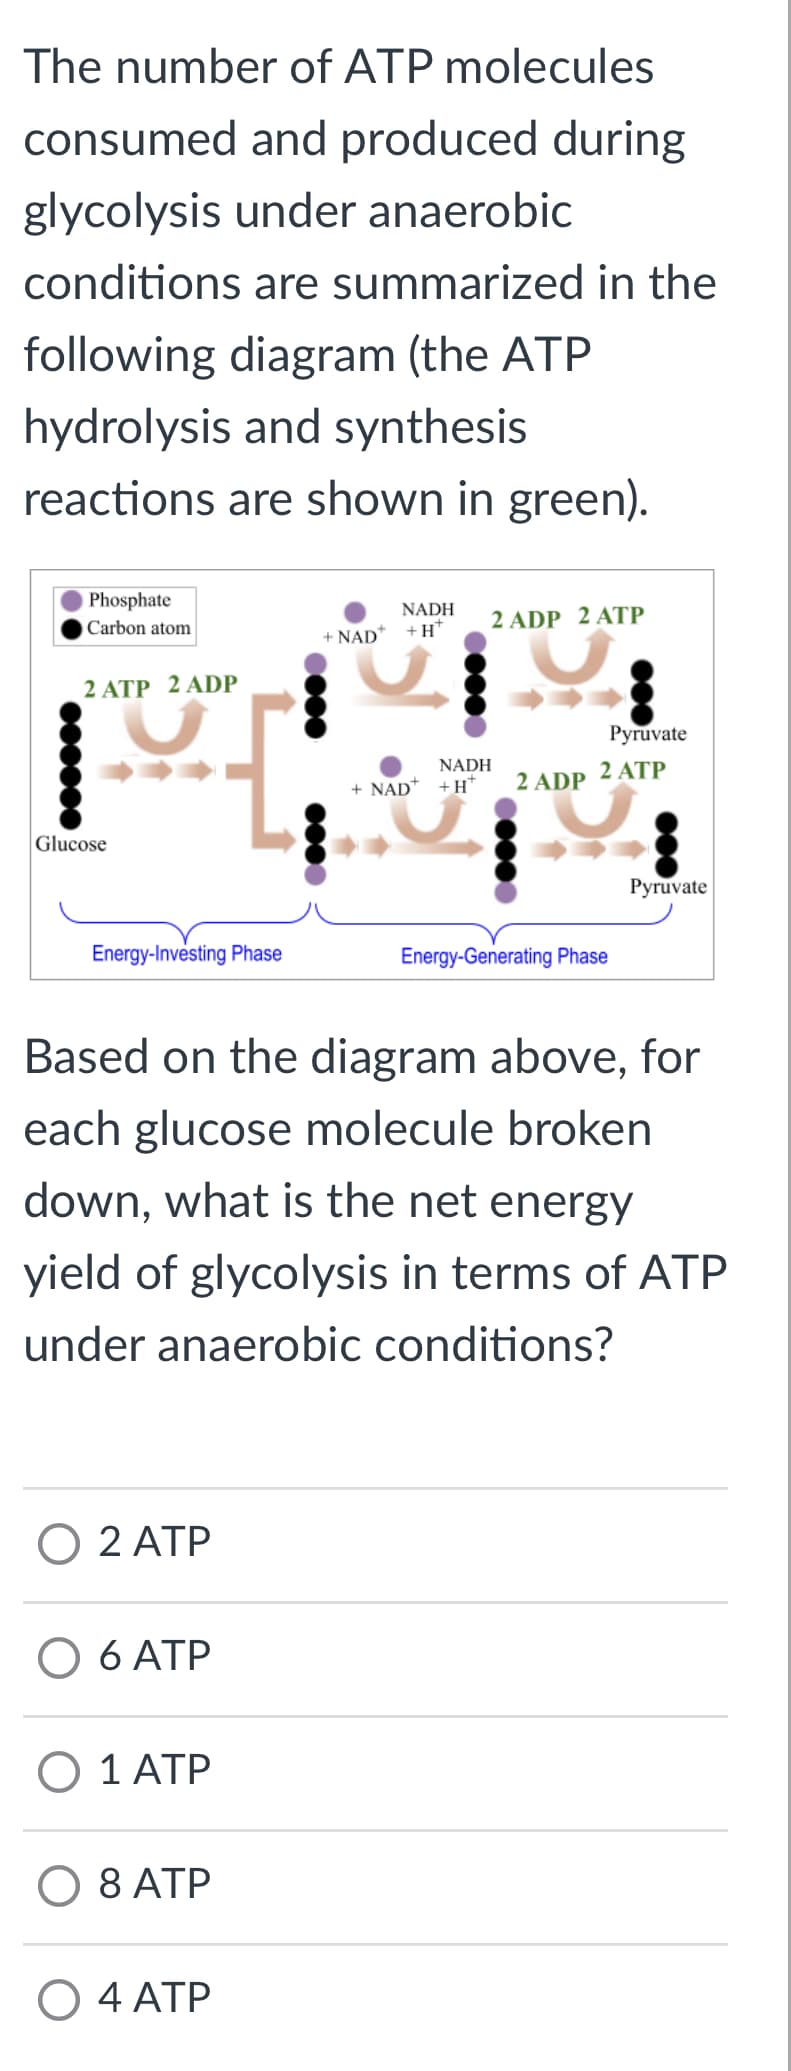 The number of ATP molecules
consumed and produced during
glycolysis under anaerobic
conditions are summarized in the
following diagram (the ATP
hydrolysis and synthesis
reactions are shown in green).
Phosphate
Carbon atom
2 ATP 2 ADP
●●●●●●
Glucose
I
Energy-Investing Phase
O 2 ATP
O 6 ATP
O 1 ATP
8 ATP
NADH
+ NAD* +H*
O 4 ATP
●●●●
2 ADP 2 ATP
NADH
+ NAD +H
Based on the diagram above, for
each glucose molecule broken
down, what is the net energy
yield of glycolysis in terms of ATP
under anaerobic conditions?
Pyruvate
2 ADP 2 ATP
●●●●●
Energy-Generating Phase
Pyruvate